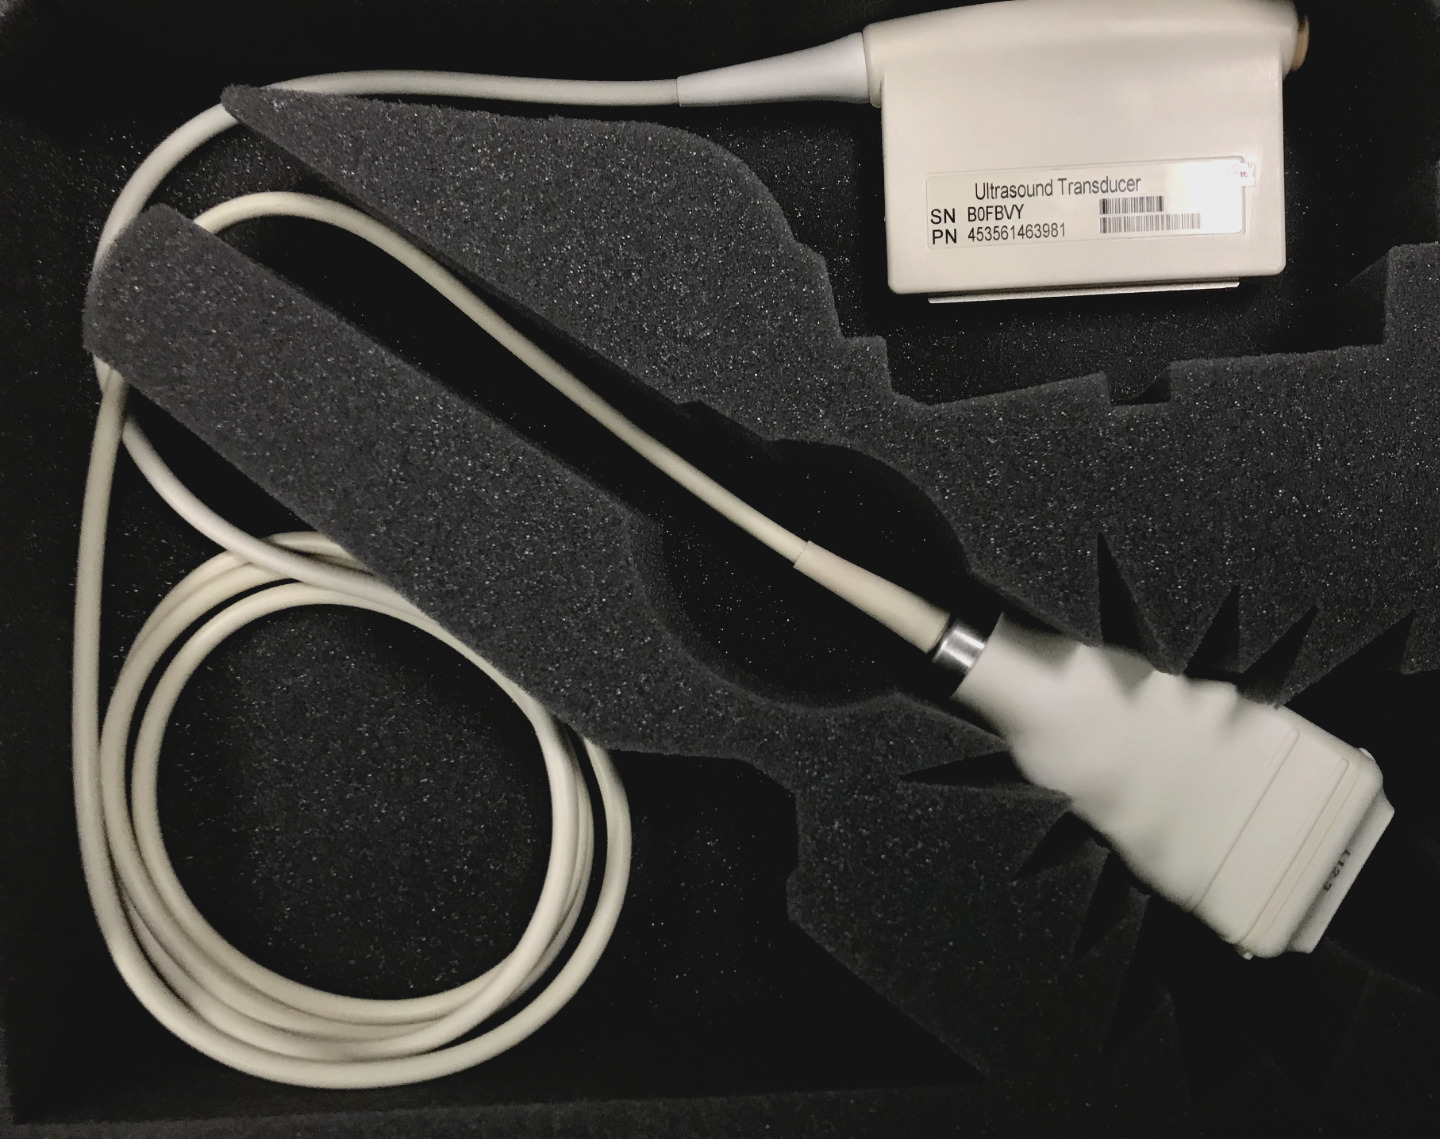 Philips L12-3 Linear Transducer Probe (P/N 453561463981)